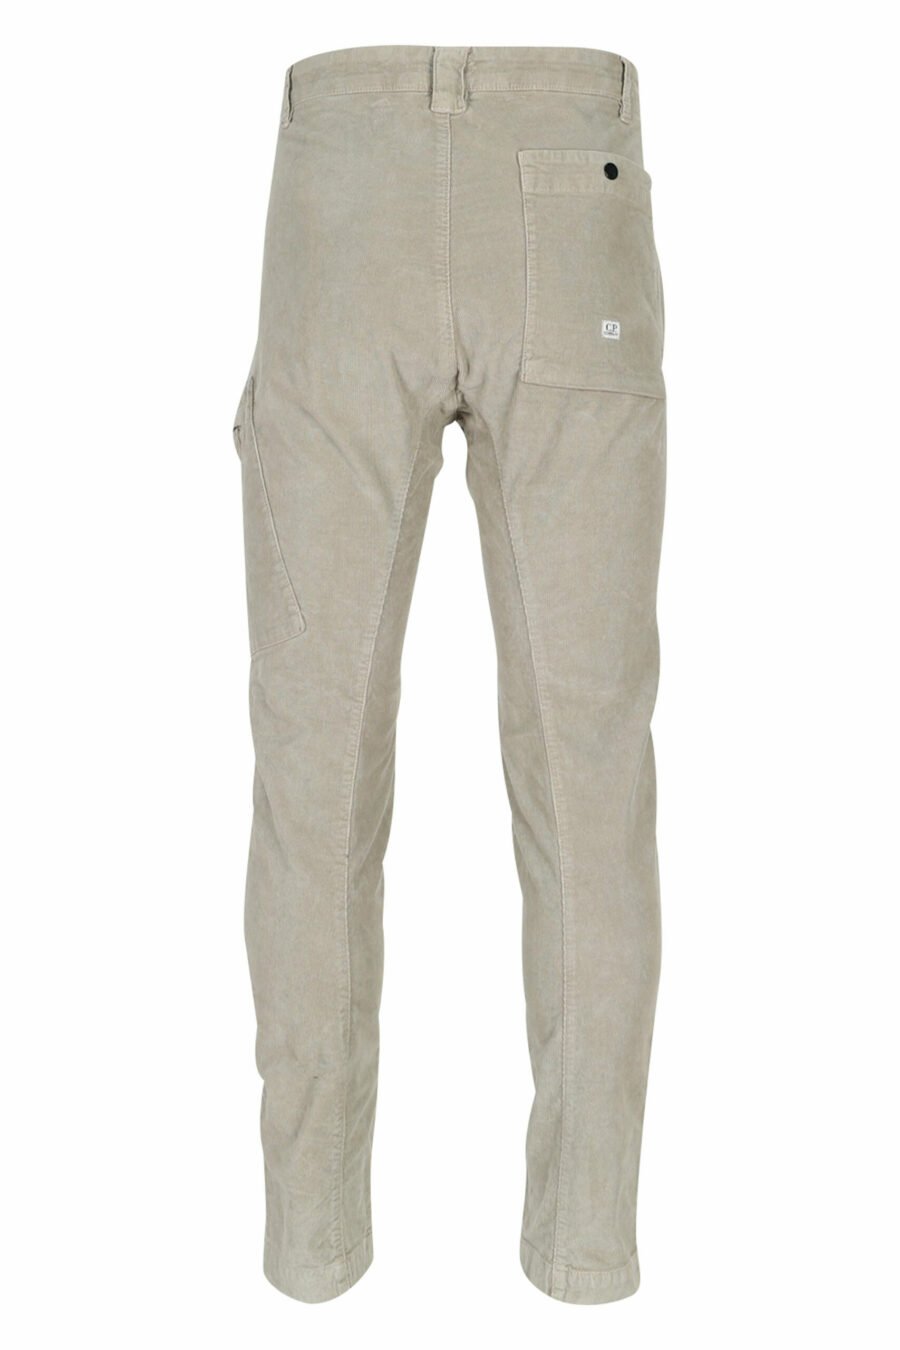 Beige corduroy trousers with side pocket and lens logo - 7620943650518 3 scaled